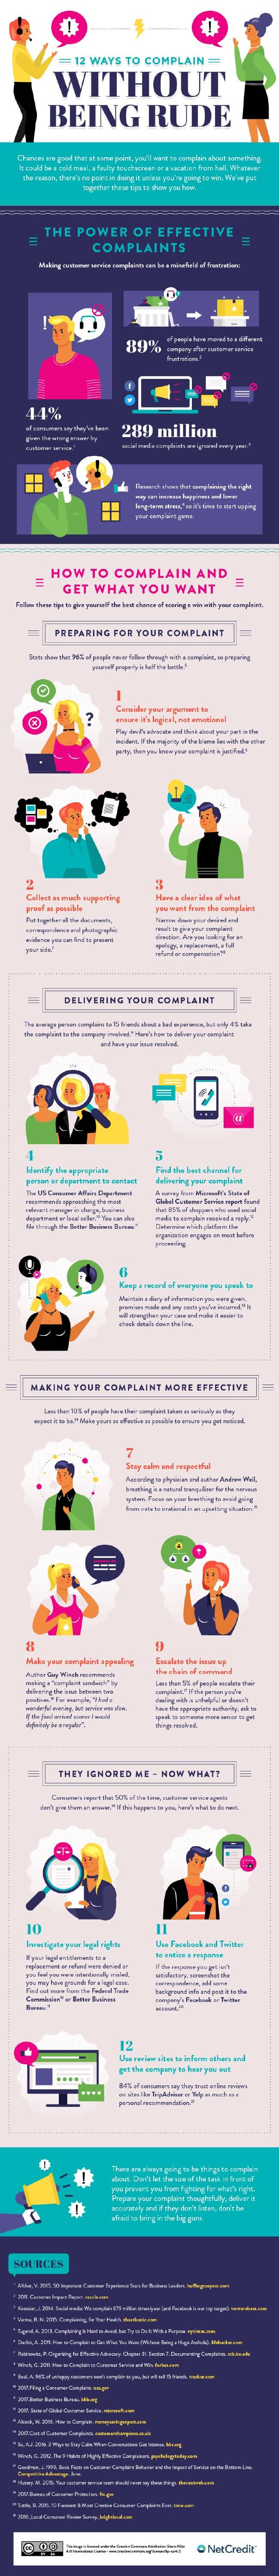 the power of effective complaints 12 ways to complain and get what you want tipsographic main